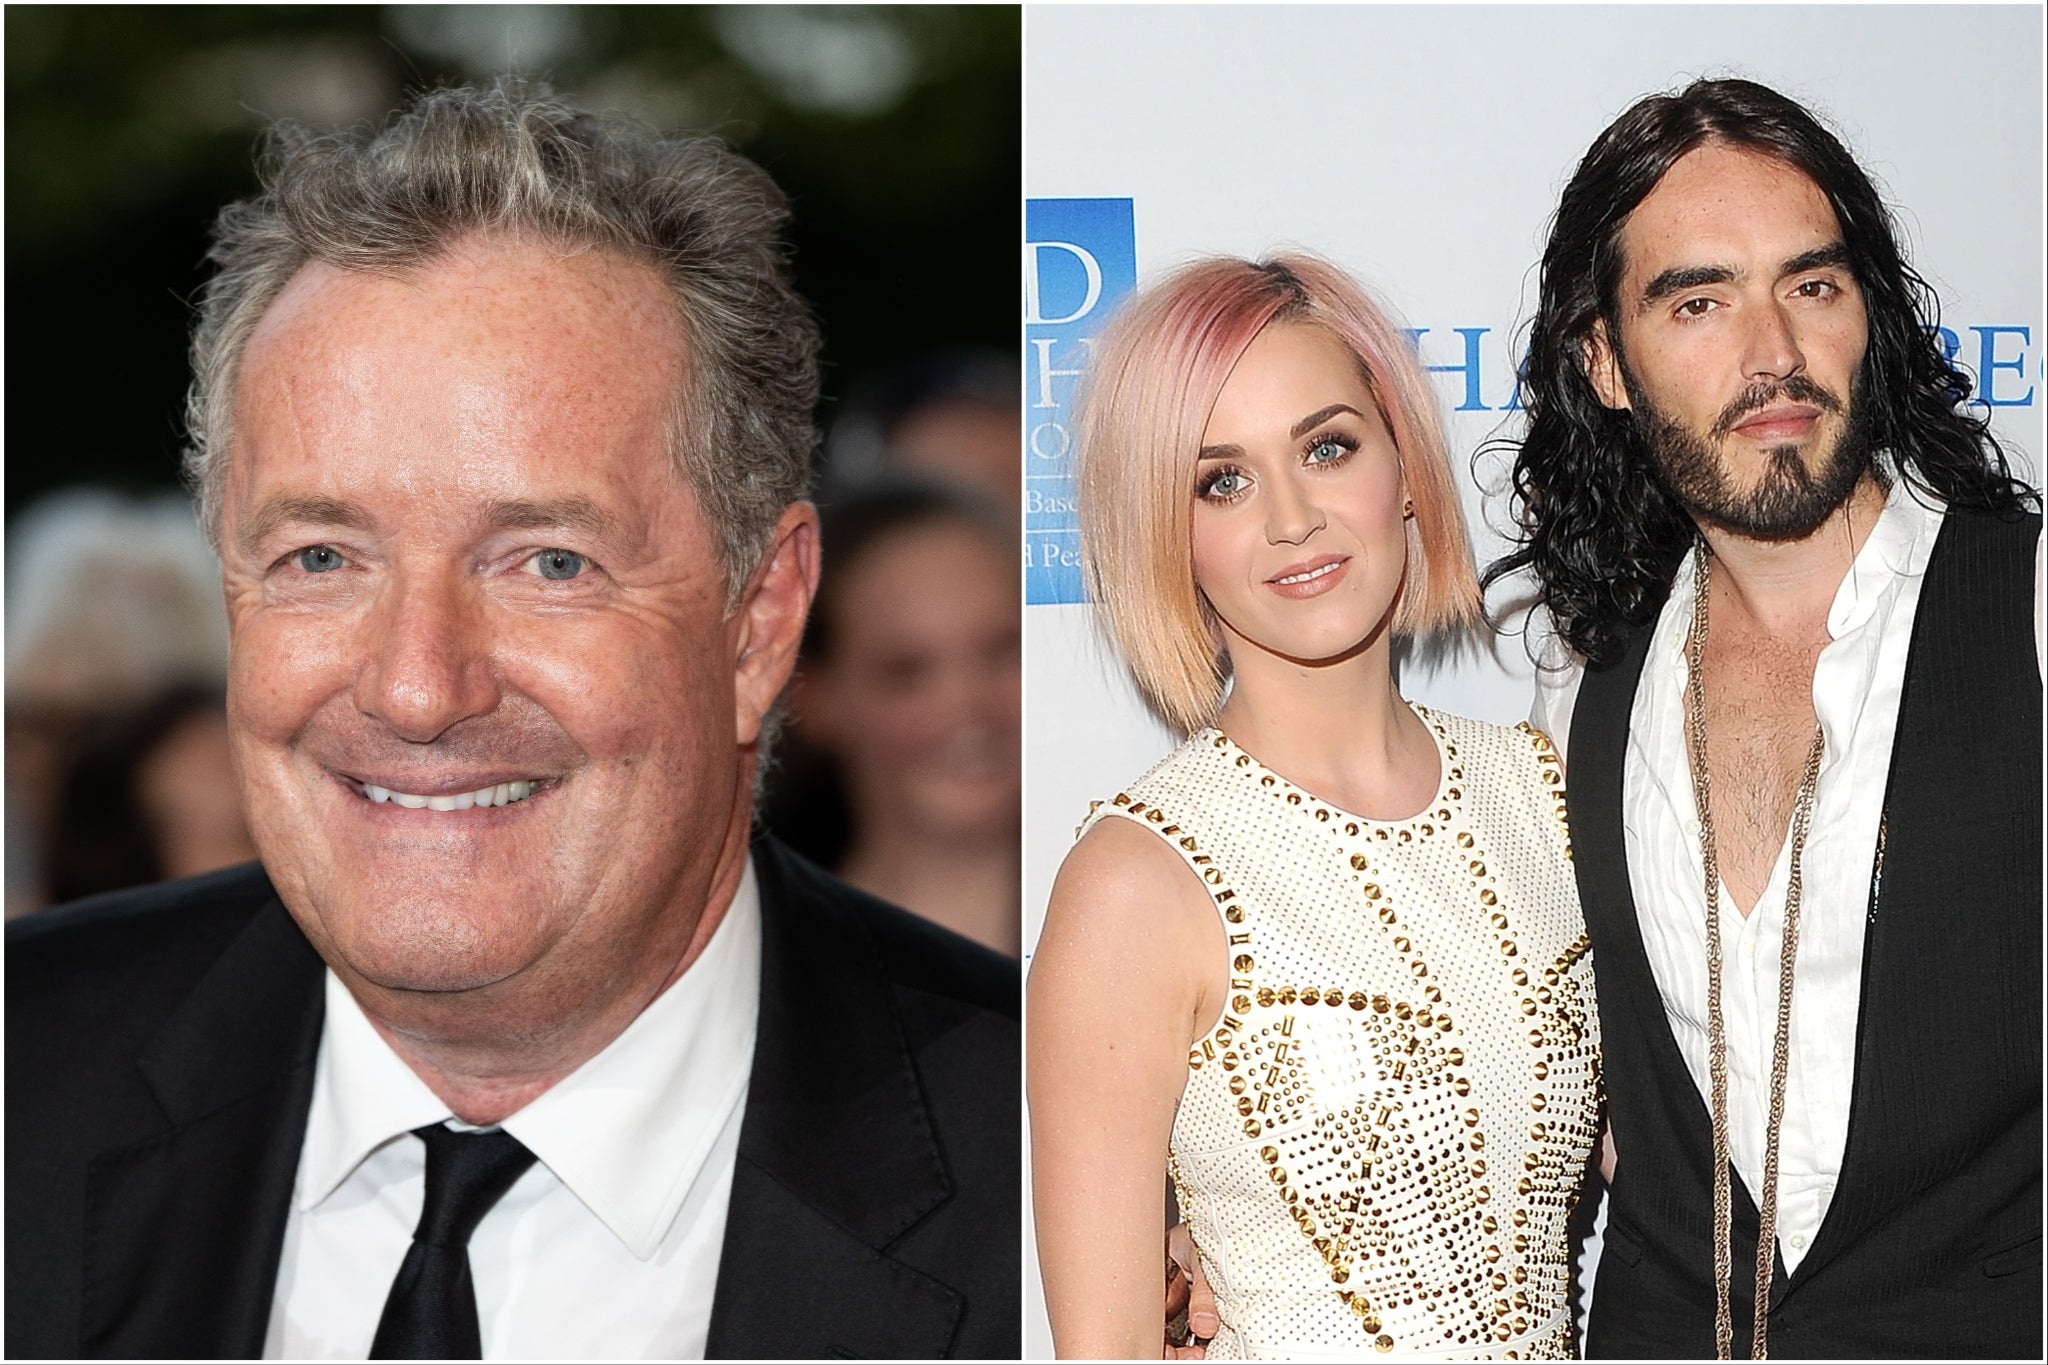 Piers Morgan (left) and Katy Perry and Russell Brand